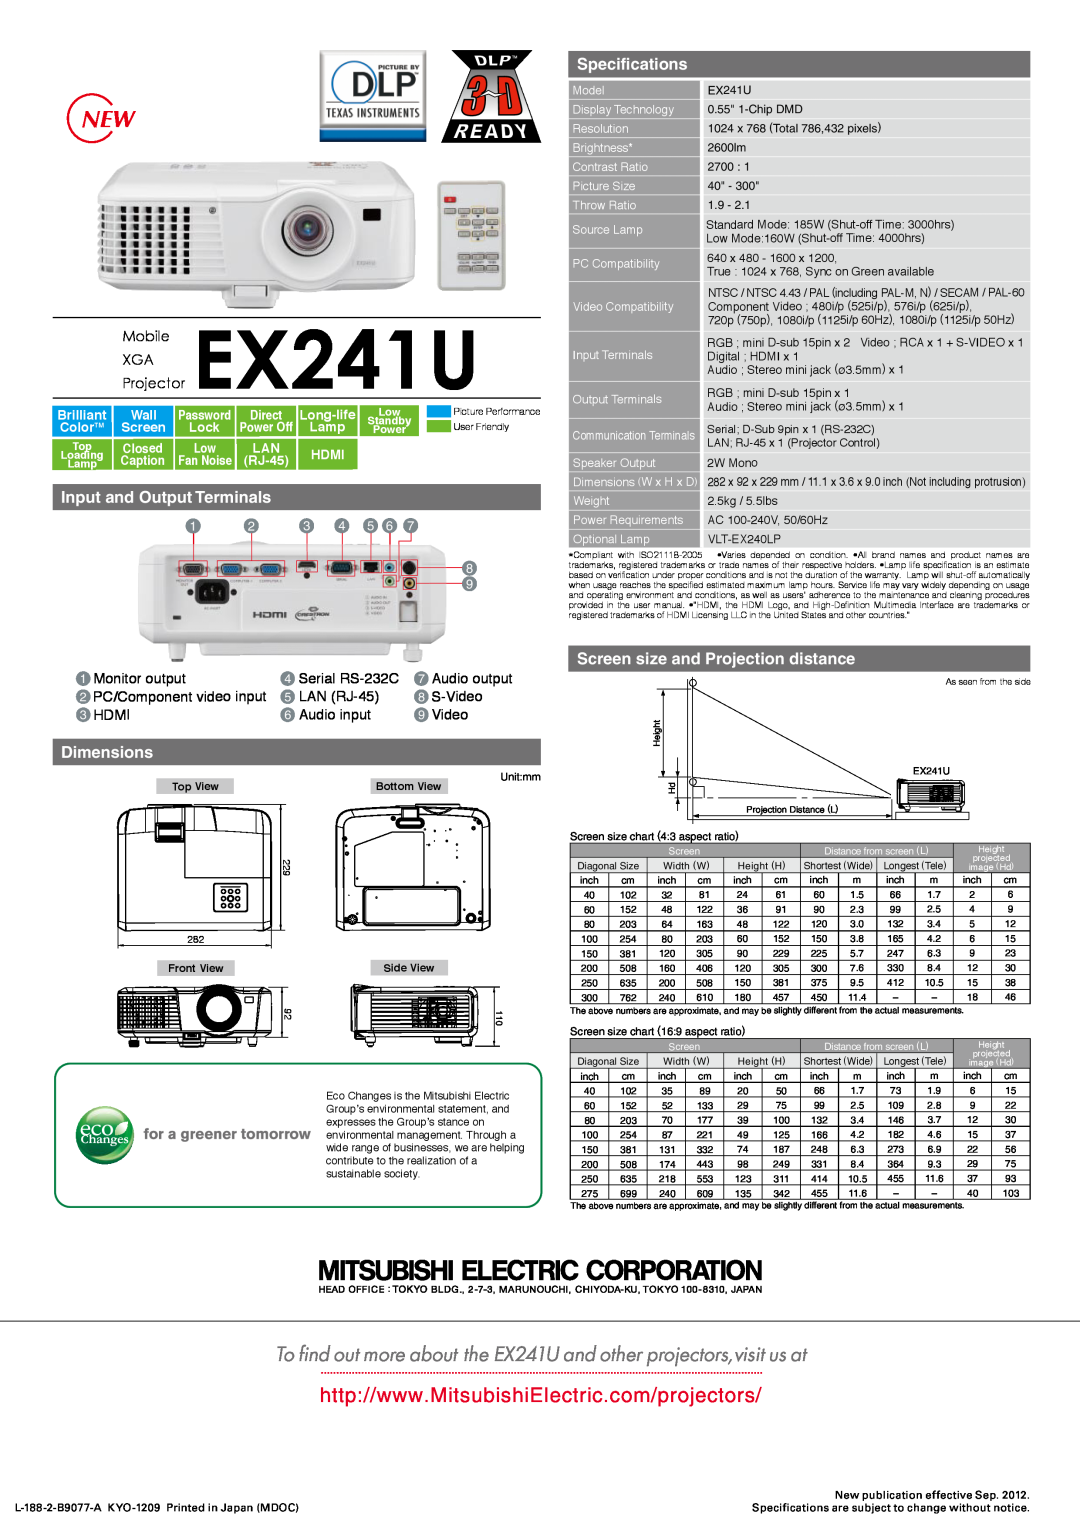 Mitsubishi Electronics To find out more about the EX241U and other projectors,visit us at, Specifications, Dimensions 